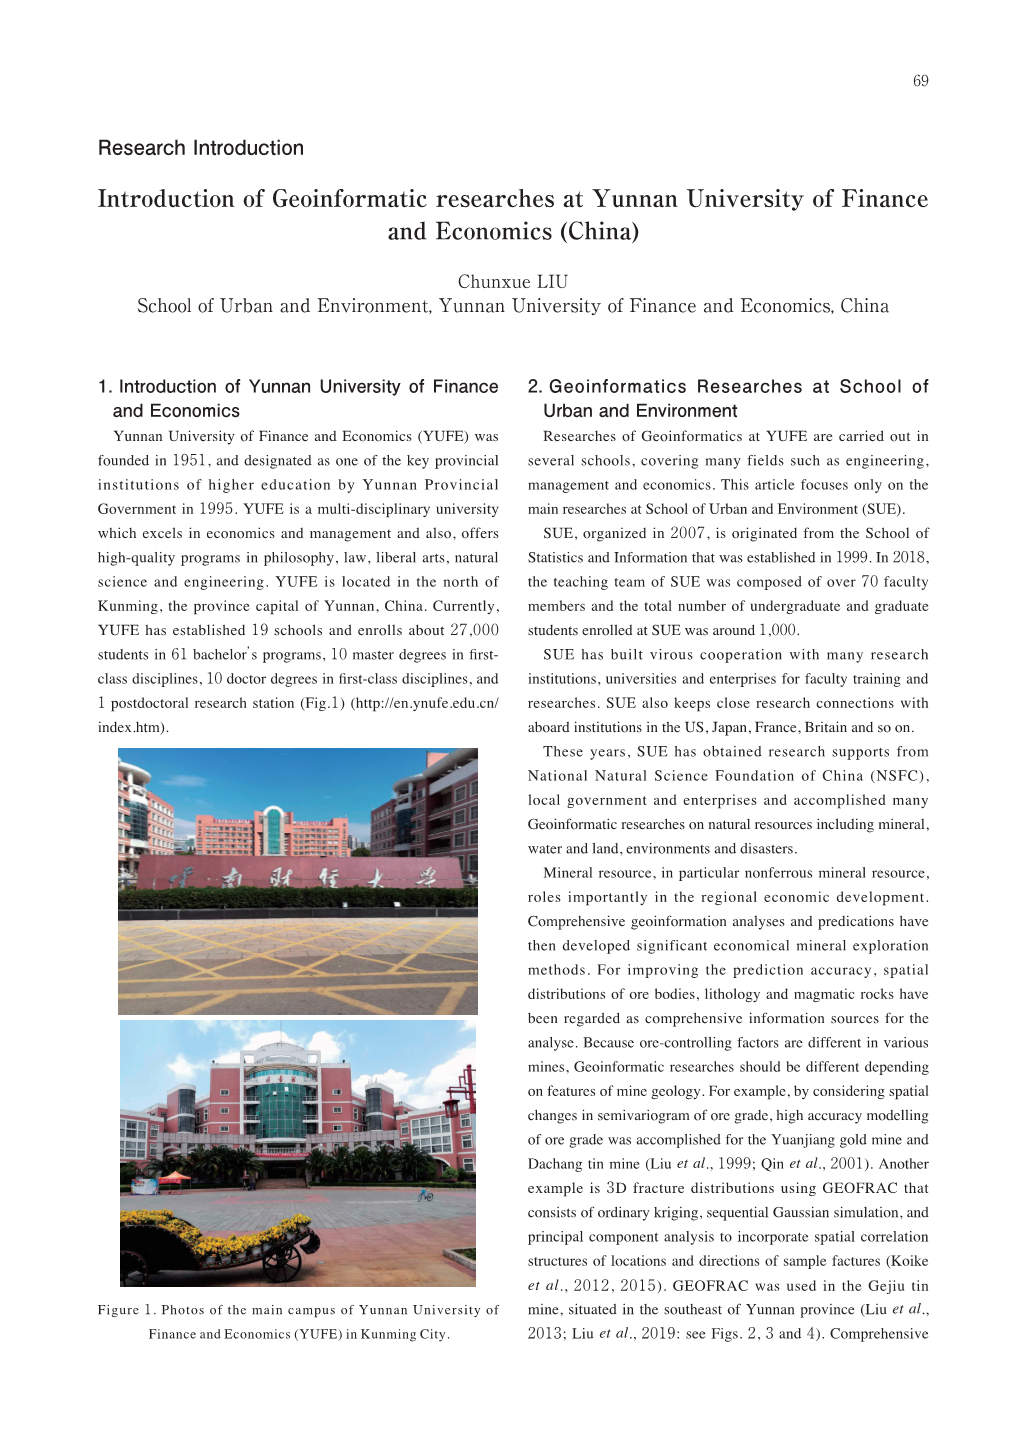 Introduction of Geoinformatic Researches at Yunnan University of Finance and Economics (China)